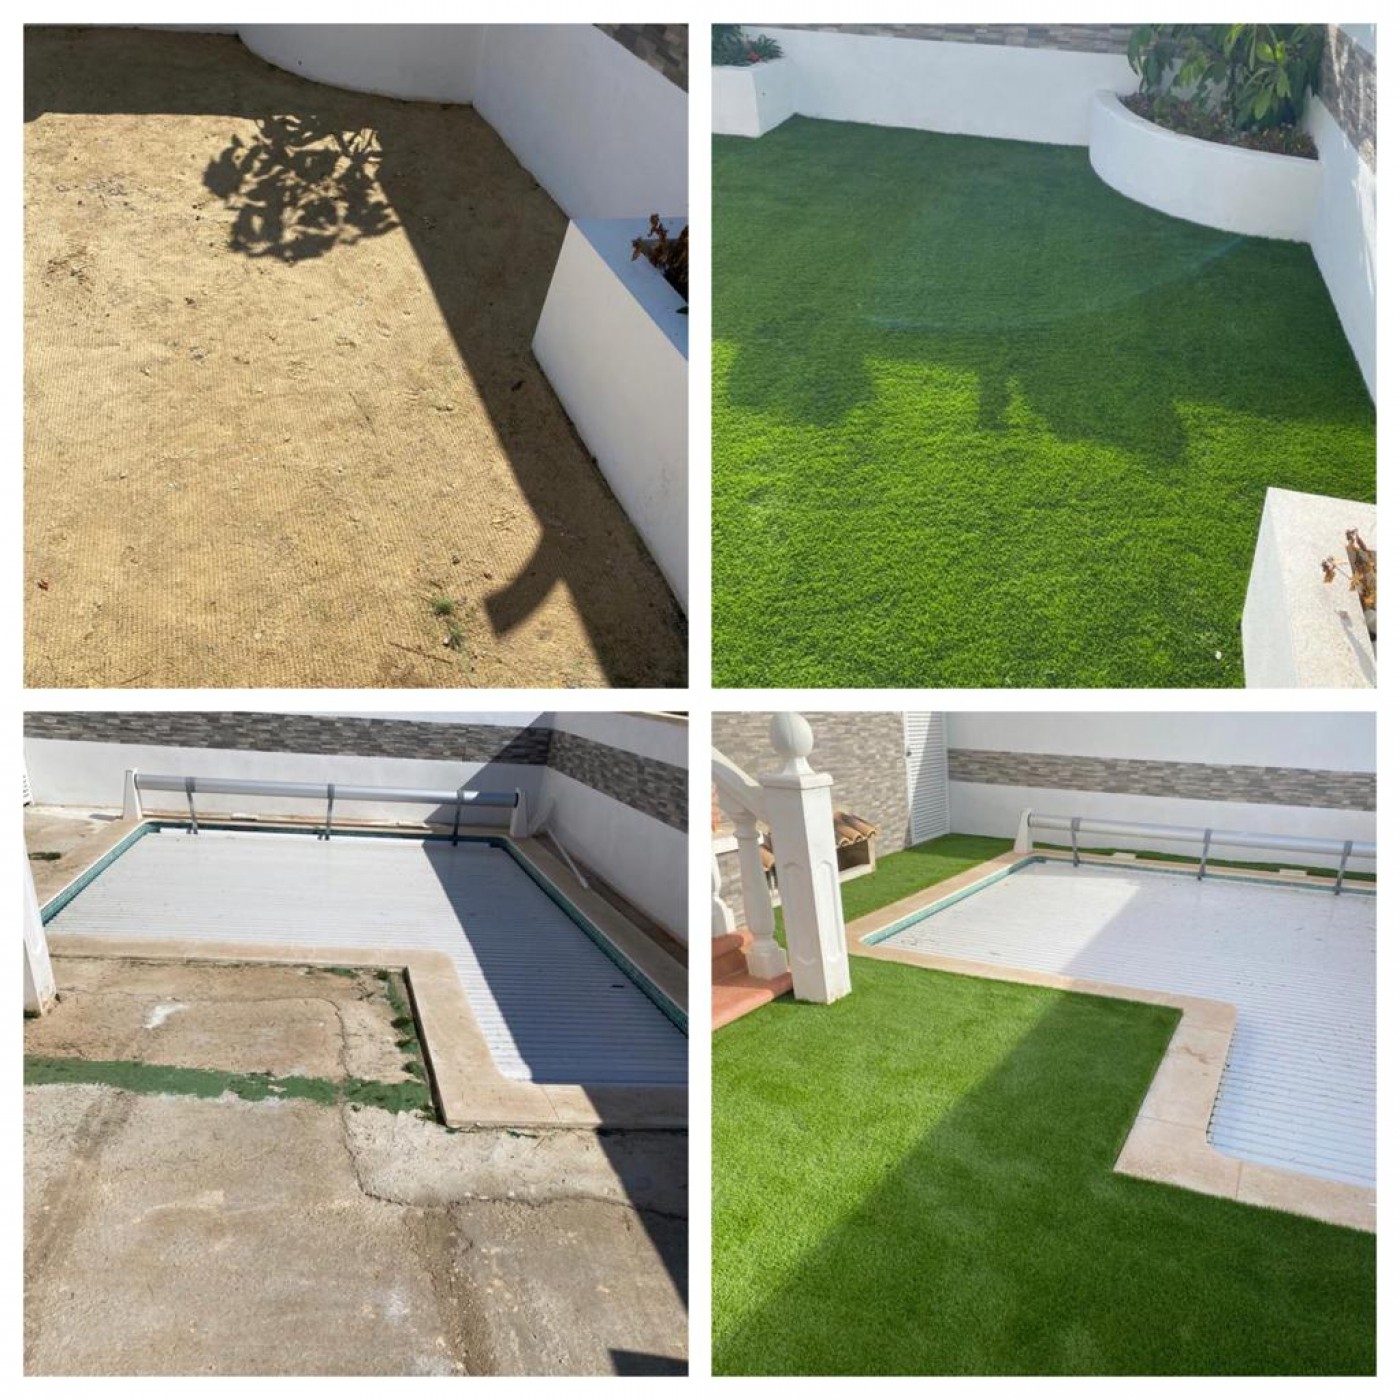 LawnHub: leading suppliers of Luxury Artificial Grass in the Murcia region and throughout Spain